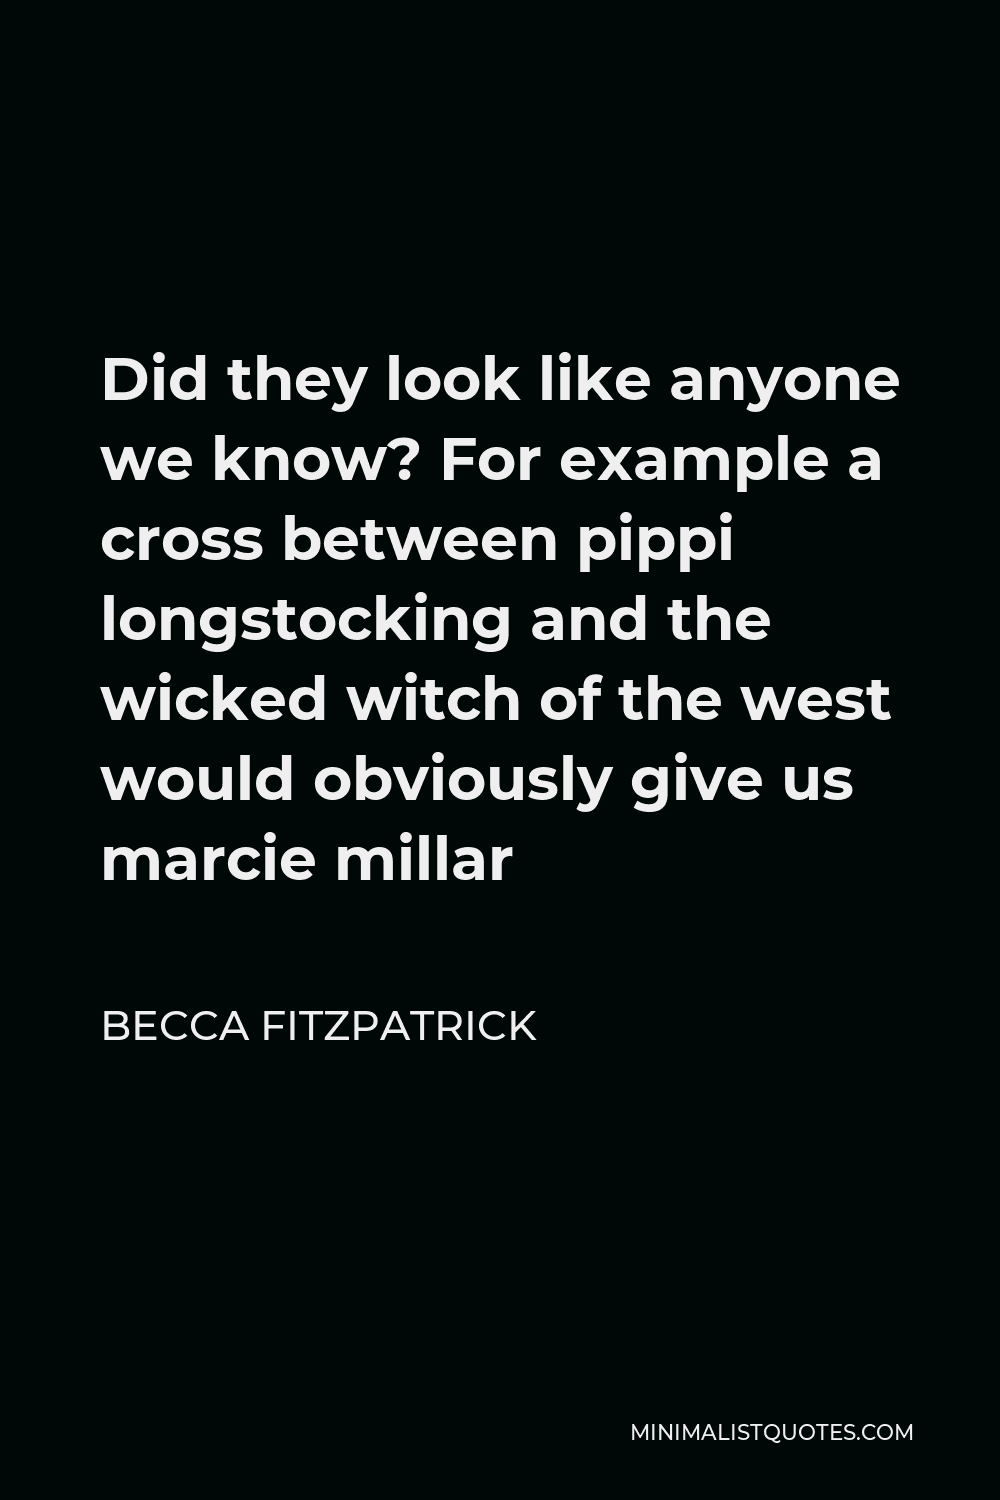 Becca Fitzpatrick Quote - Did they look like anyone we know? For example a cross between pippi longstocking and the wicked witch of the west would obviously give us marcie millar